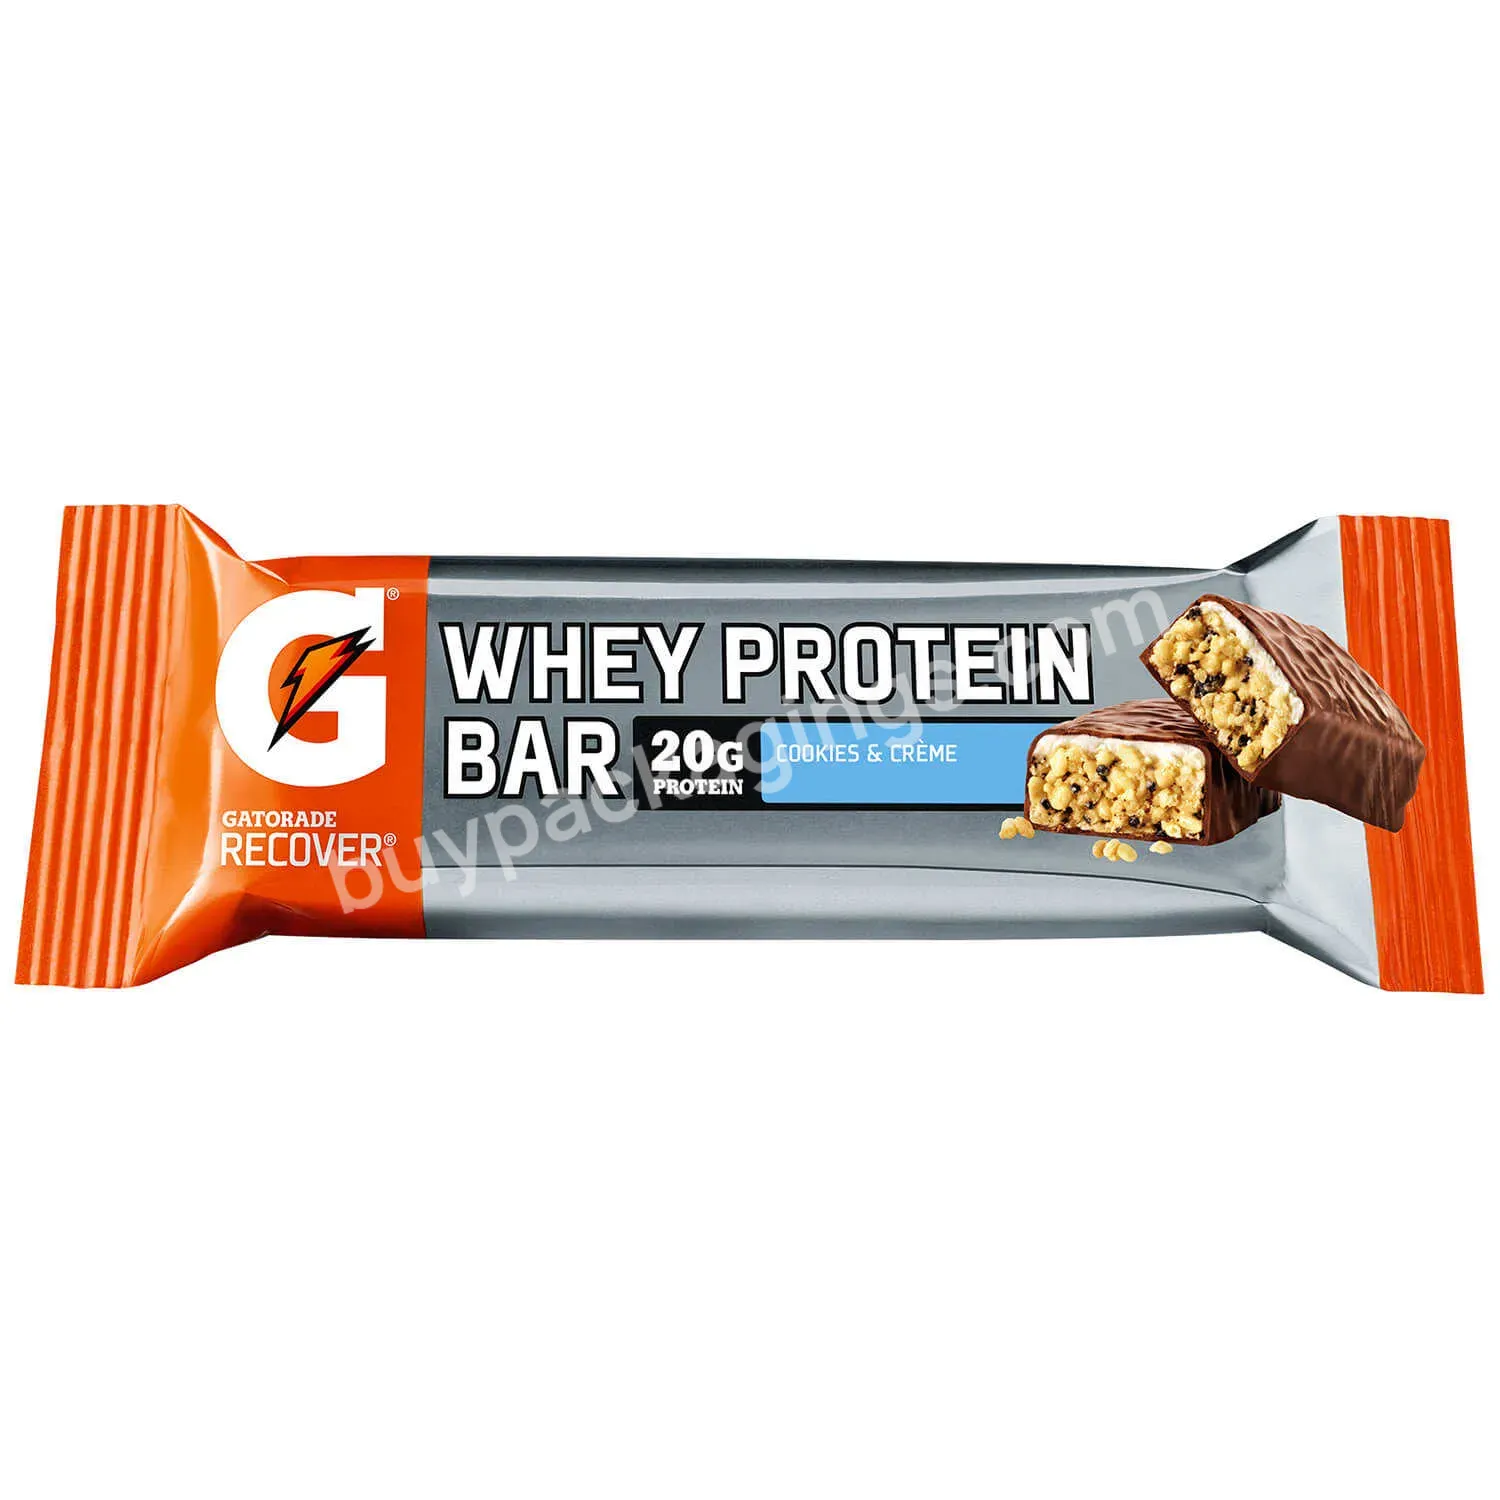 Oem Sterile Environmentally Friendly Resealable Stand Up Pouch Biodegradable Protein Bar Packaging - Buy Protein Packaging,Biodegradable Protein Bar Packaging,Protein Bar Packaging.